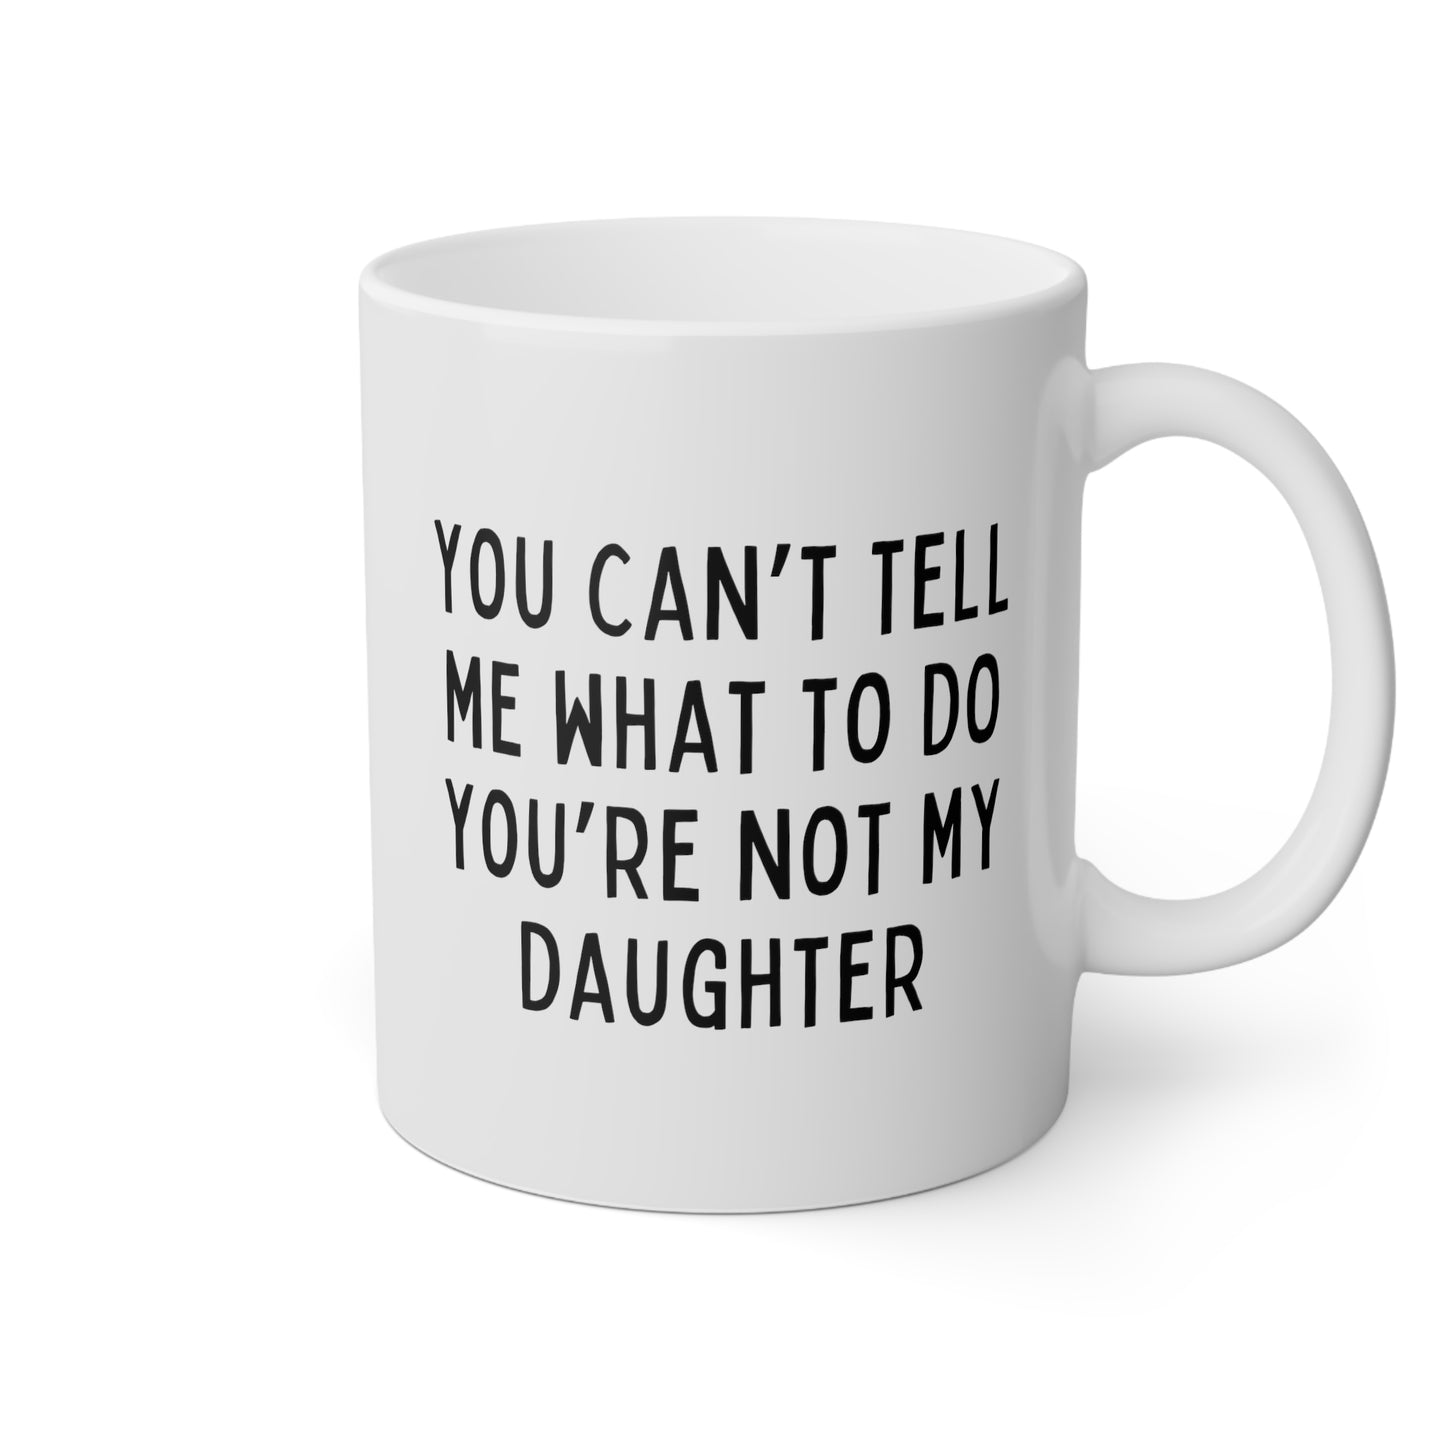 You Can't Tell Me What To Do You're Not My Daughter 11oz white funny large coffee mug gift for dad fathers day grandfather grandpa waveywares wavey wares wavywares wavy wares